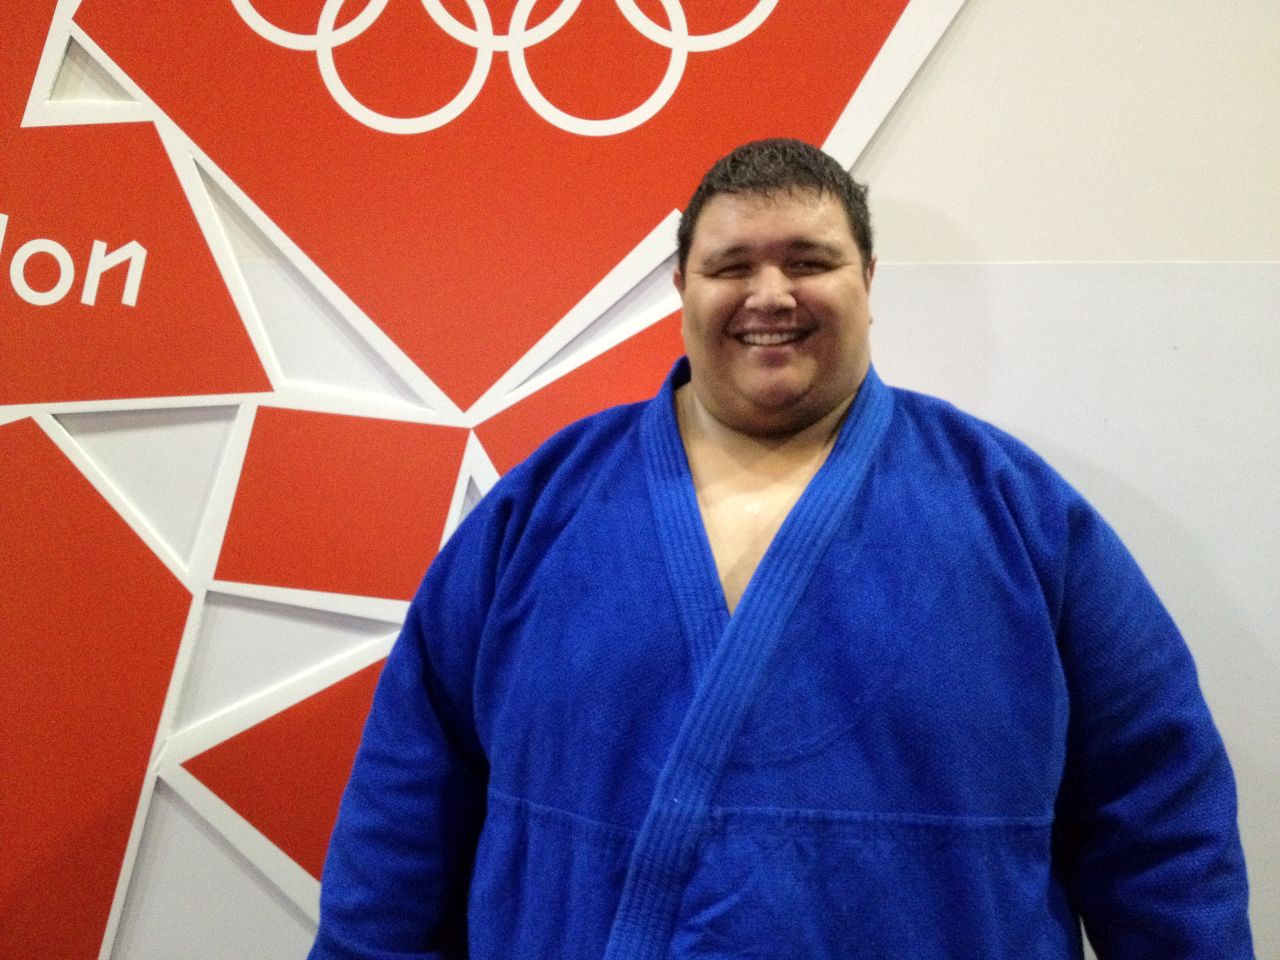 Over two hundred nations have taken part in the modern Olympic Games since 1896, and of them 79 are yet to win a single medal. Guam, a small island in the Pacific Ocean that barely covers 200 square miles, is one such country.  From their population of 180, 000, judokan Ricardo Blas Jr. qualified along with seven others to compete at the London Olympics.